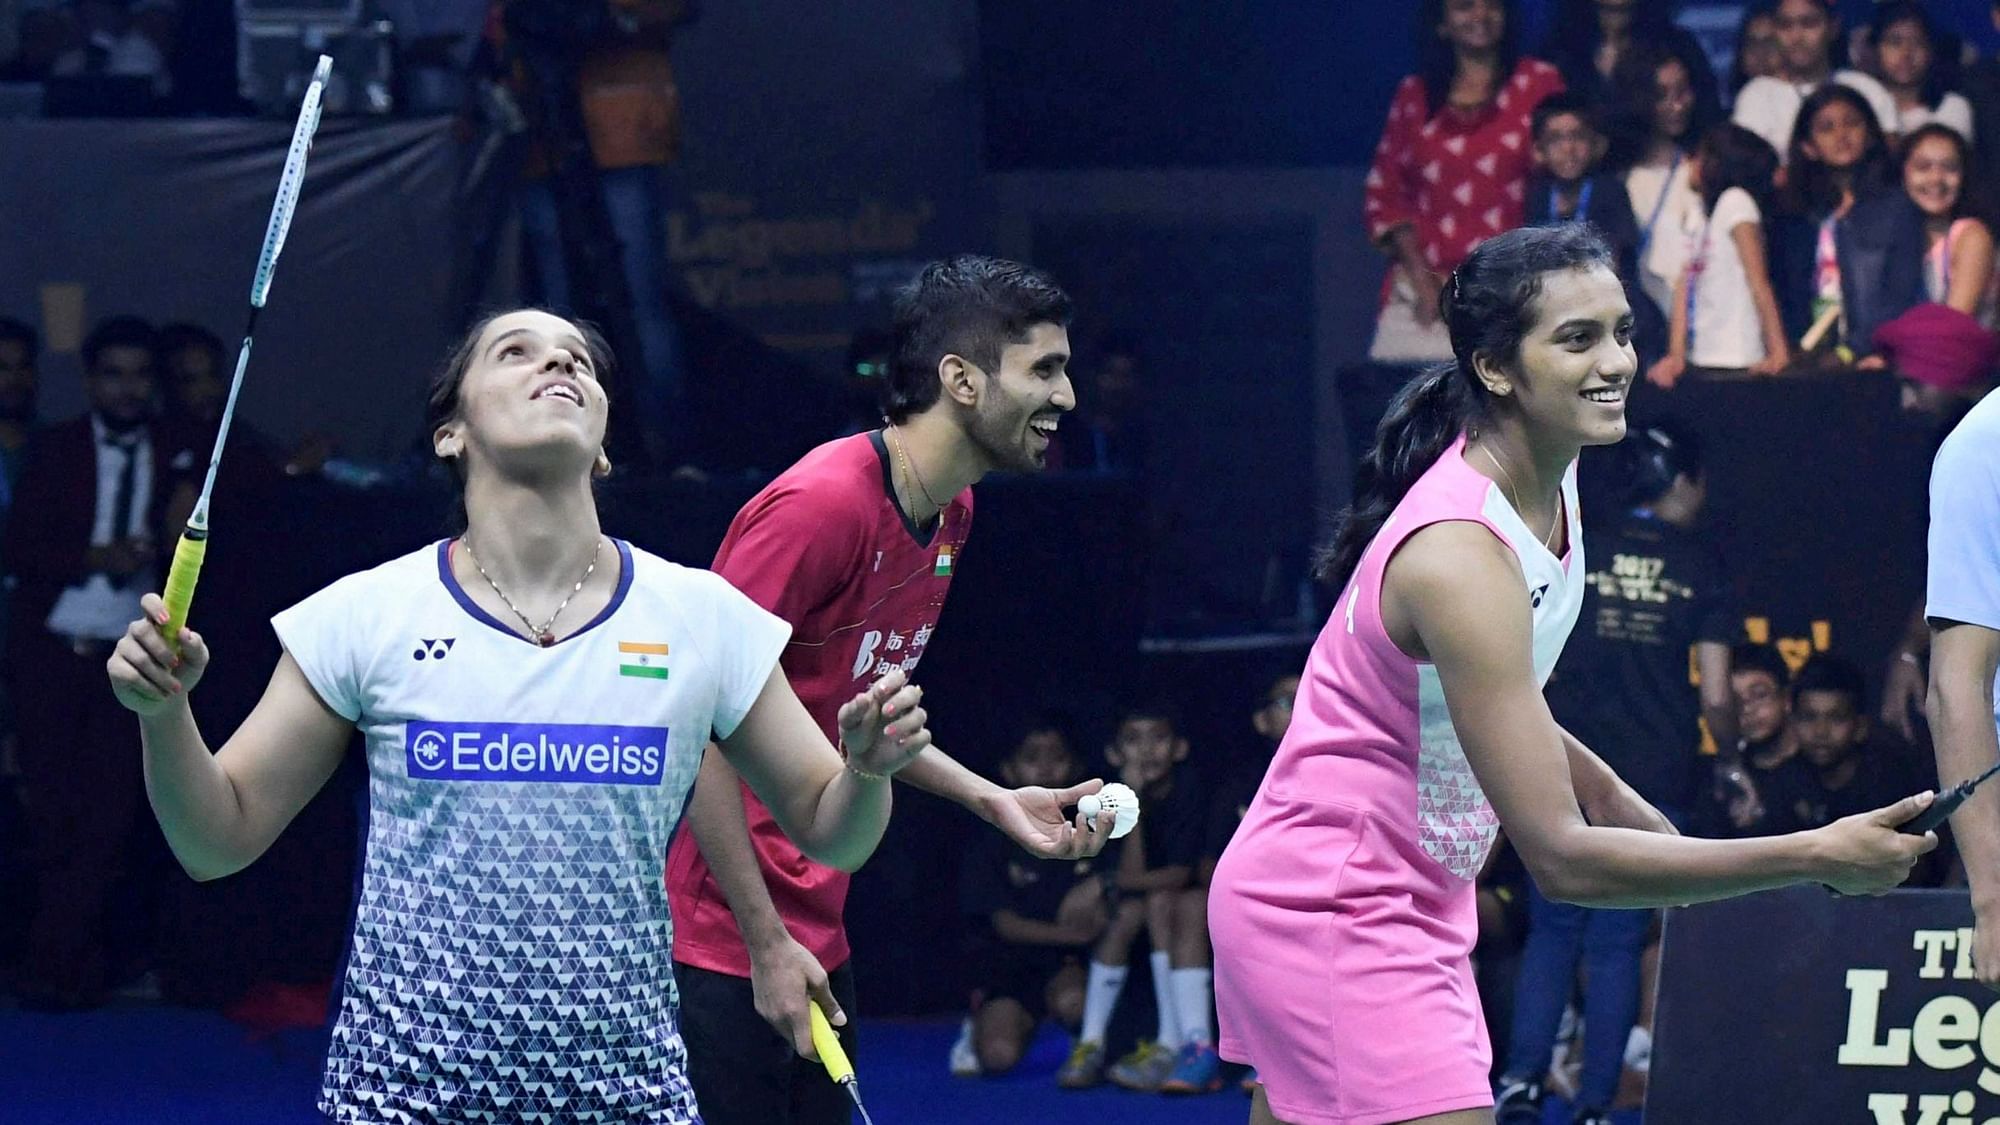 Saina Nehwal, Kidambi Srikanth, PV Sindhu are all part of India’s squads for the Thomas and Uber Cup.